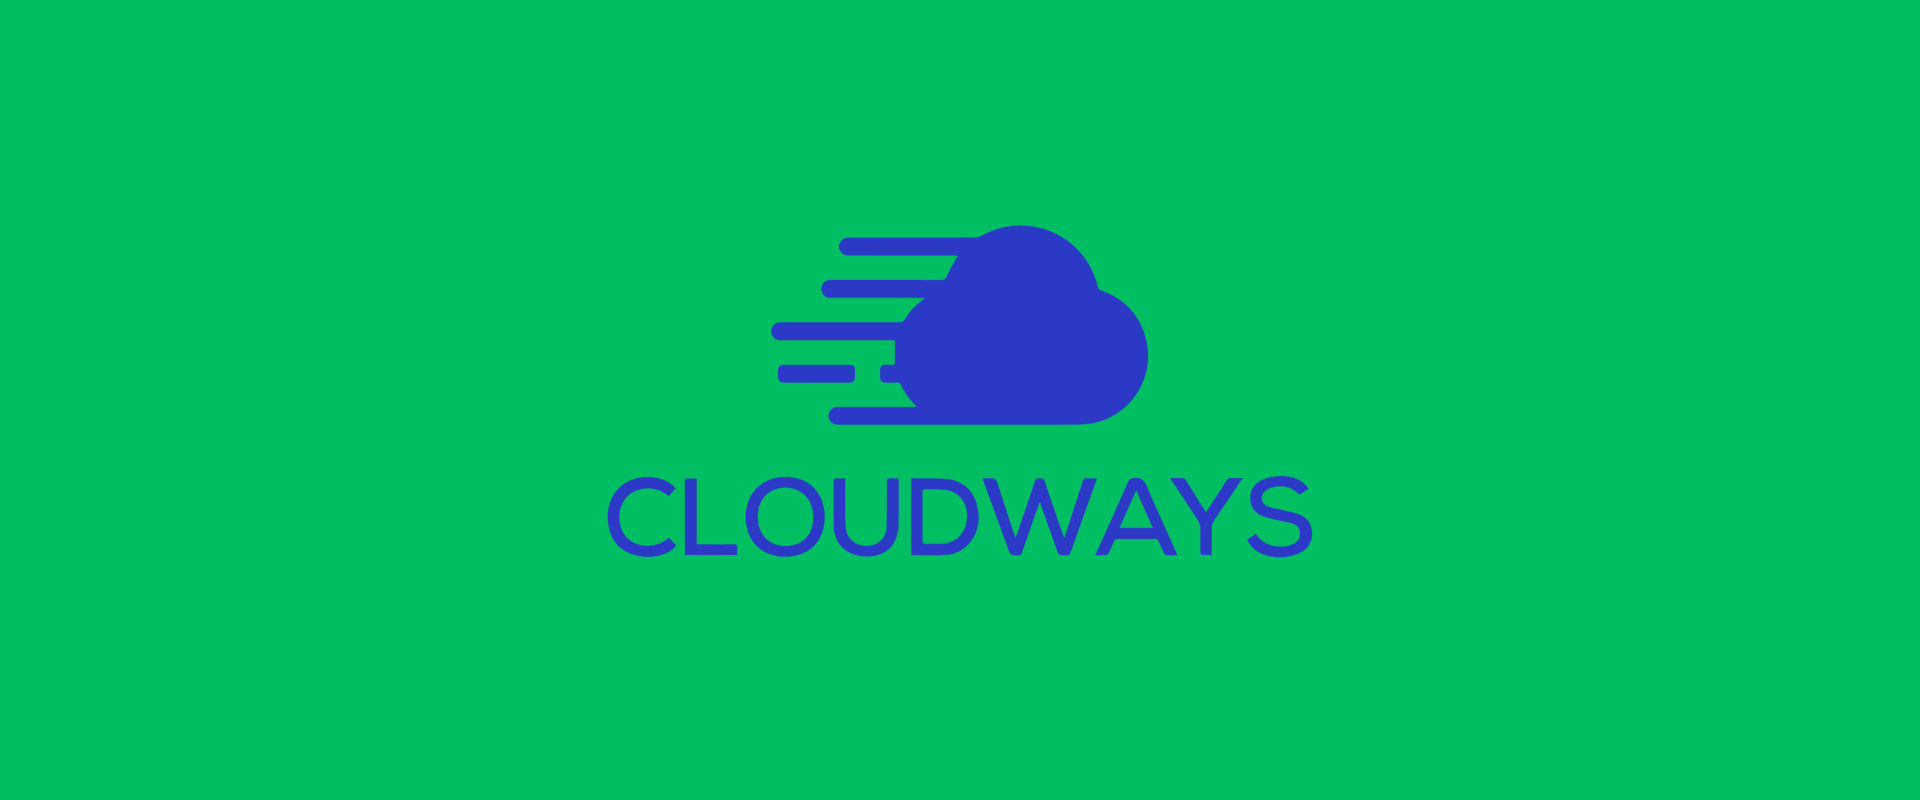 Cloudways Review- What is Cloudways and Why Review it